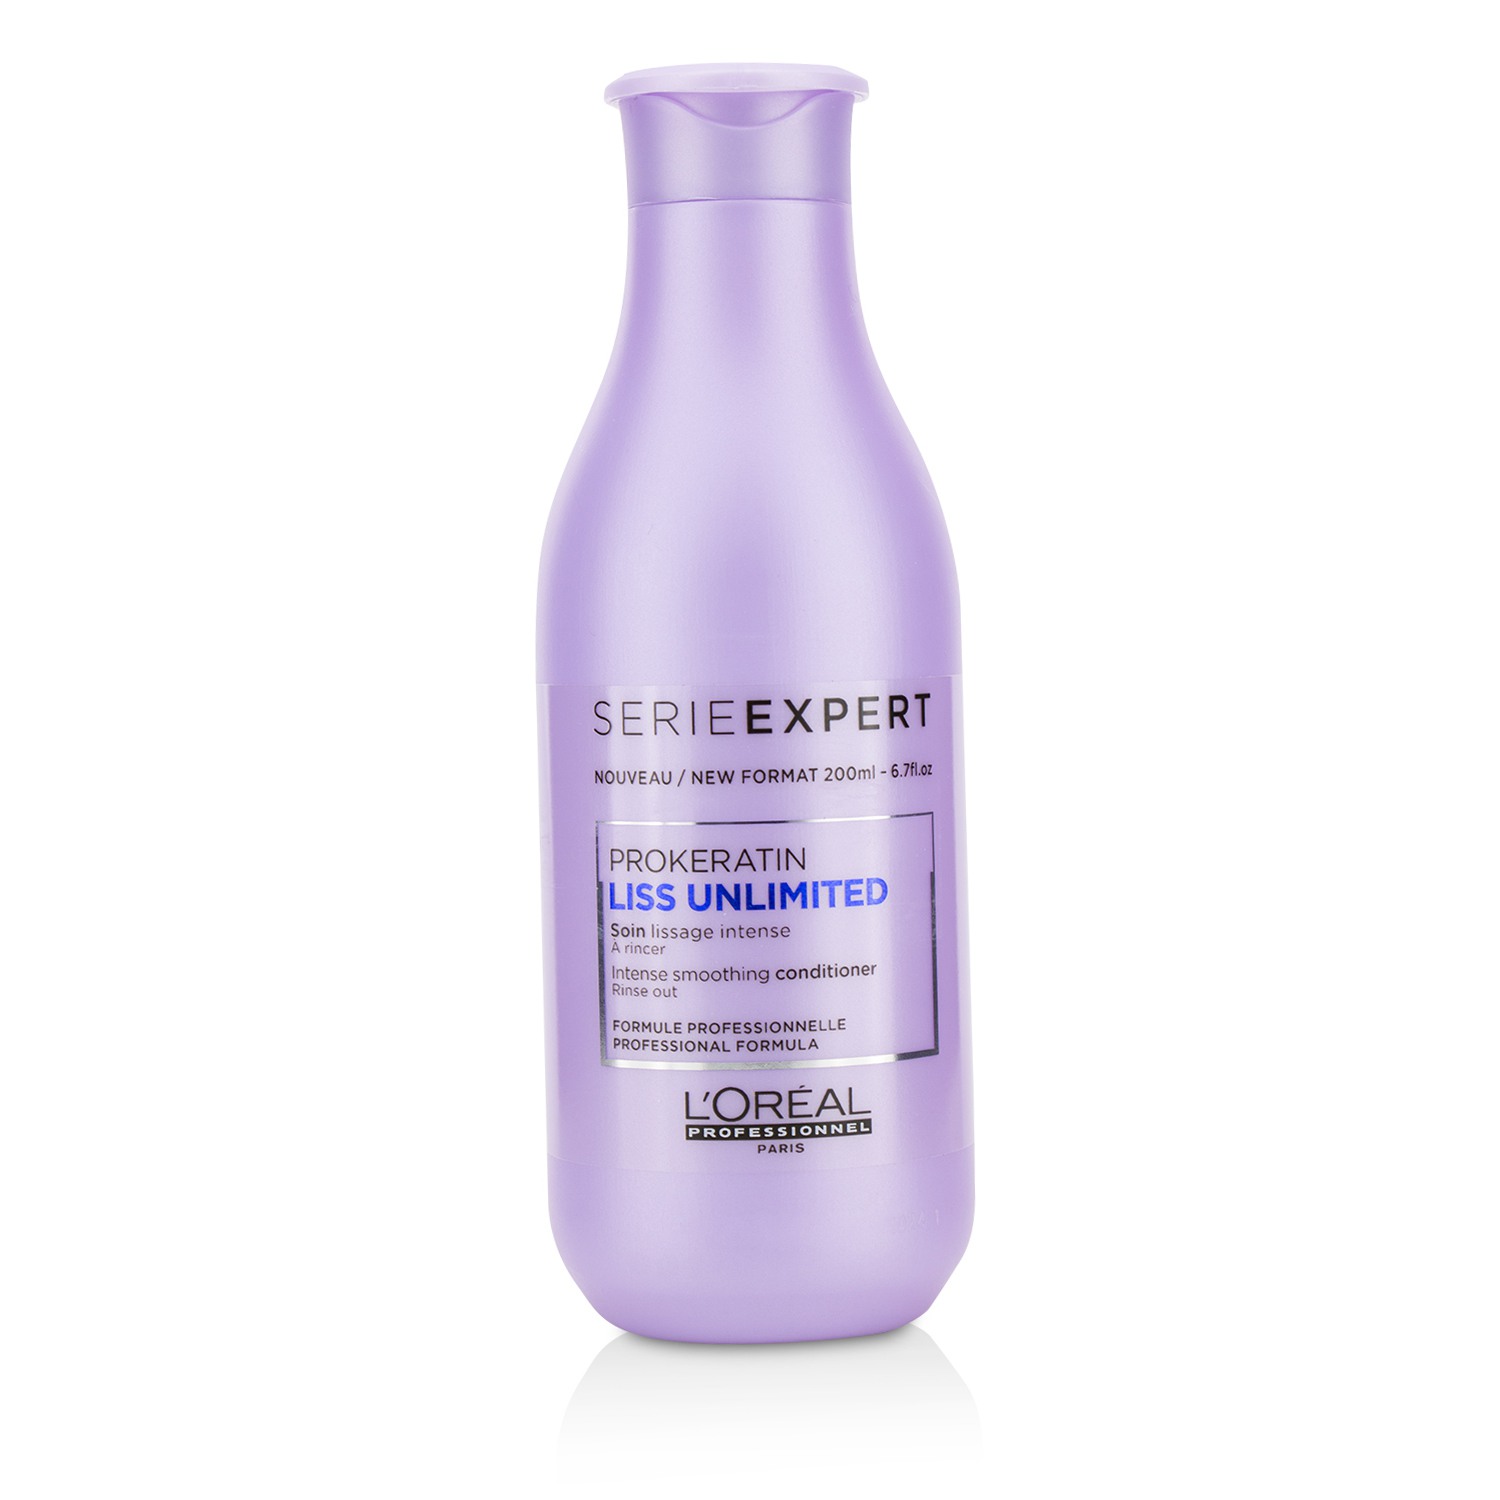 Professionnel Serie Expert - Liss Unlimited Prokeratin Intense Smoothing Conditioner LOreal Image